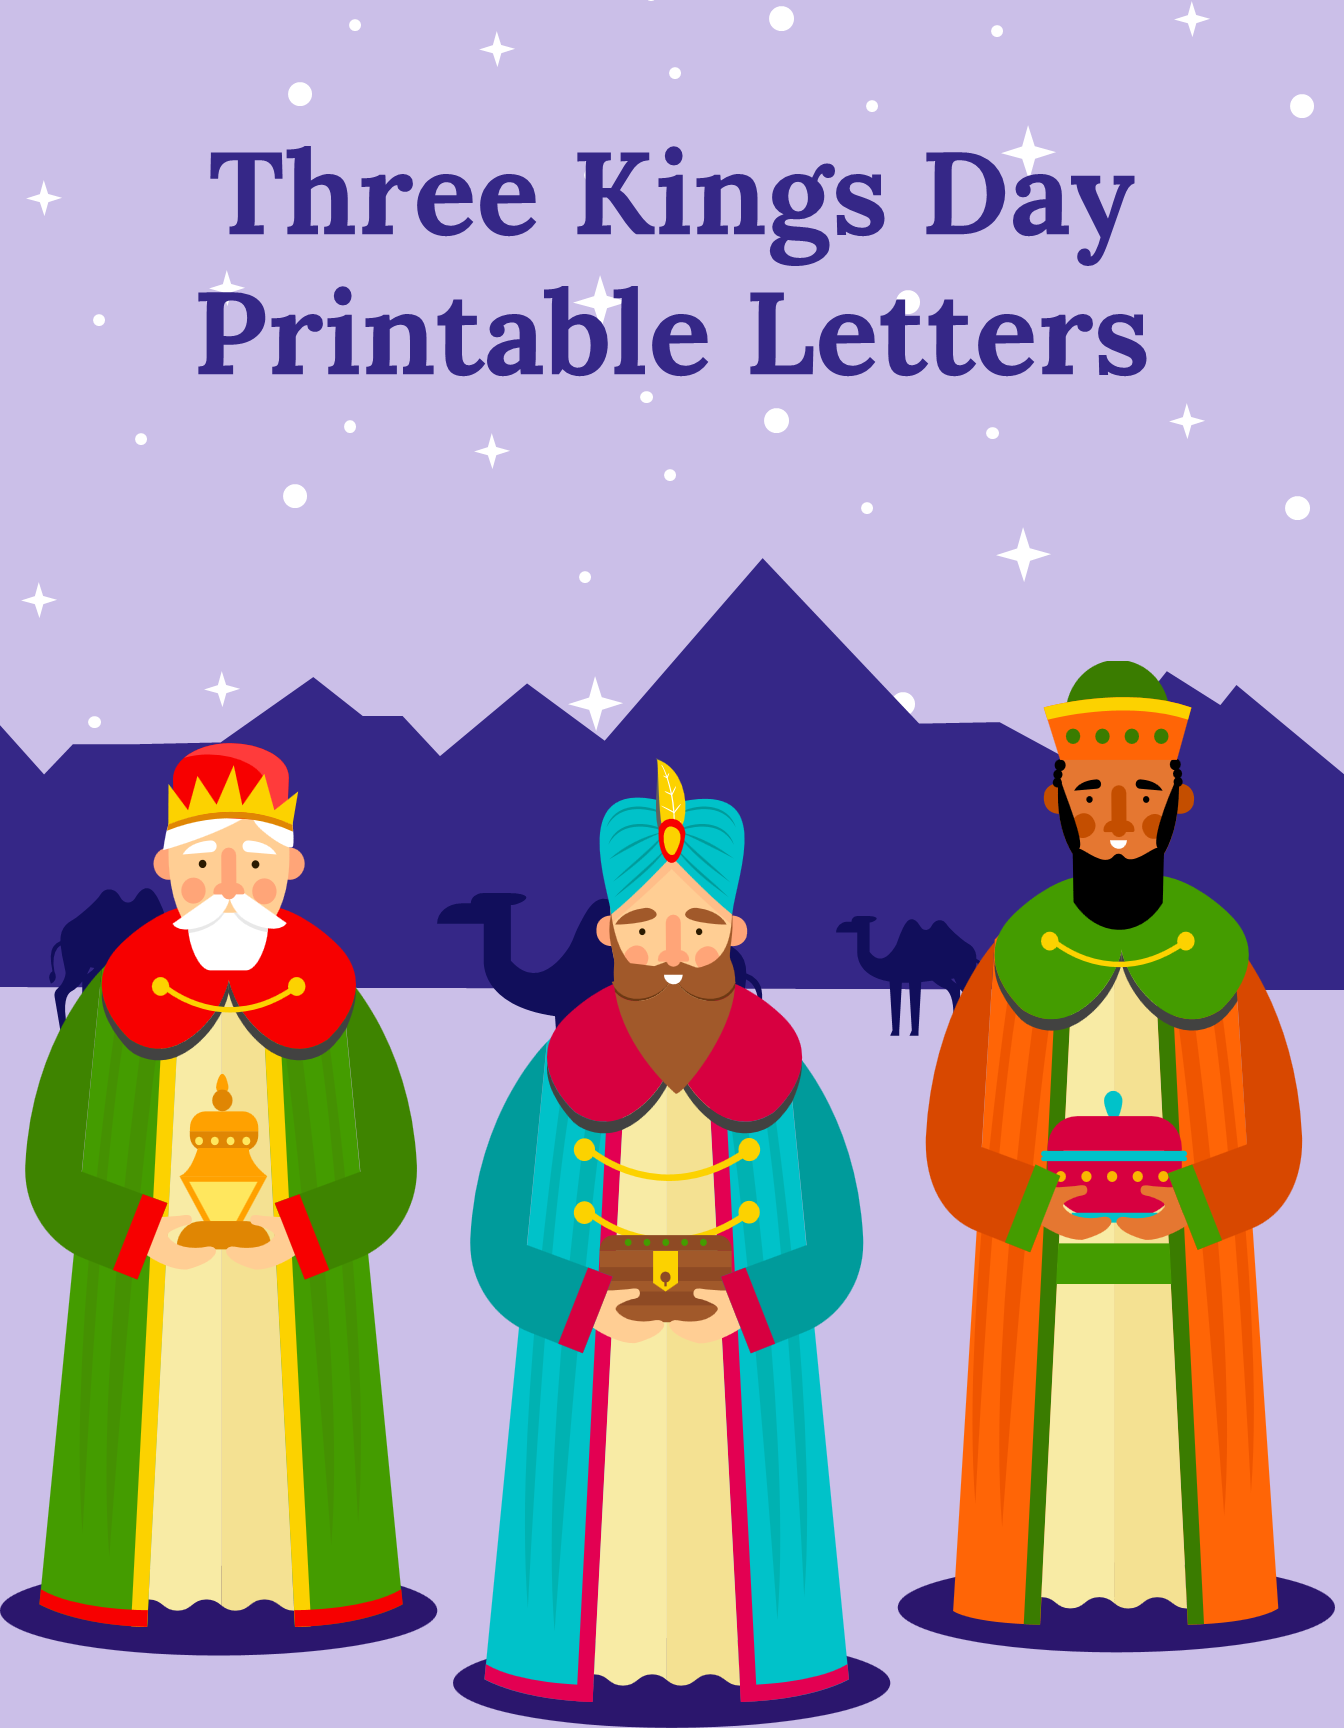 Three Kings Day Printable Letters